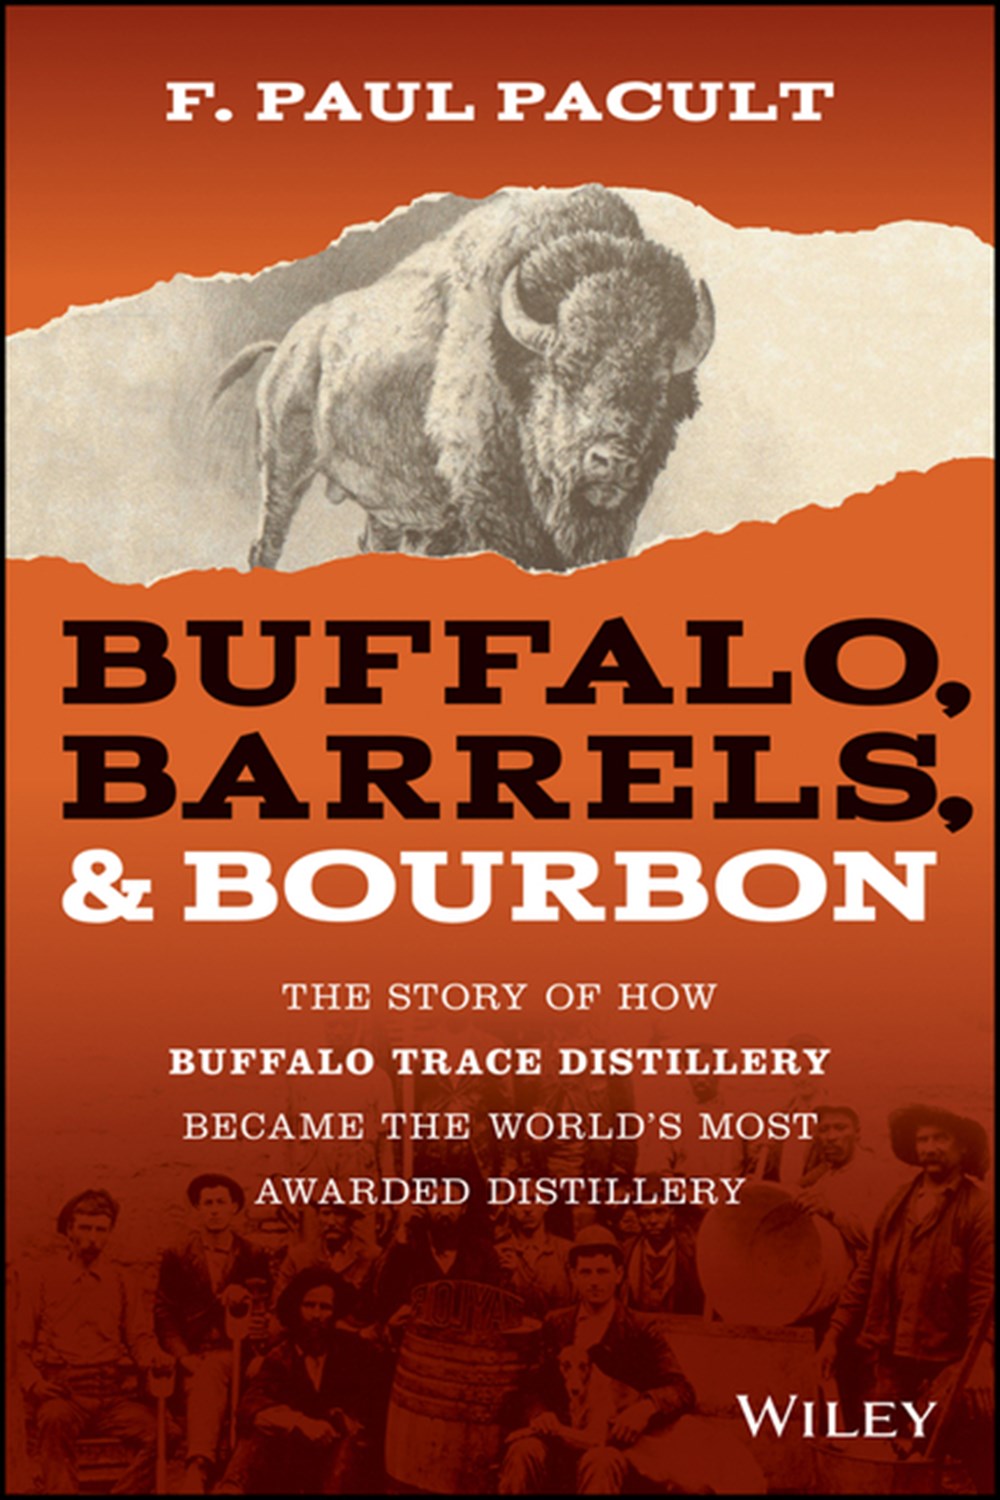 Buffalo, Barrels, and Bourbon: The Story of How Buffalo Trace Distillery Became the World's Most Awa